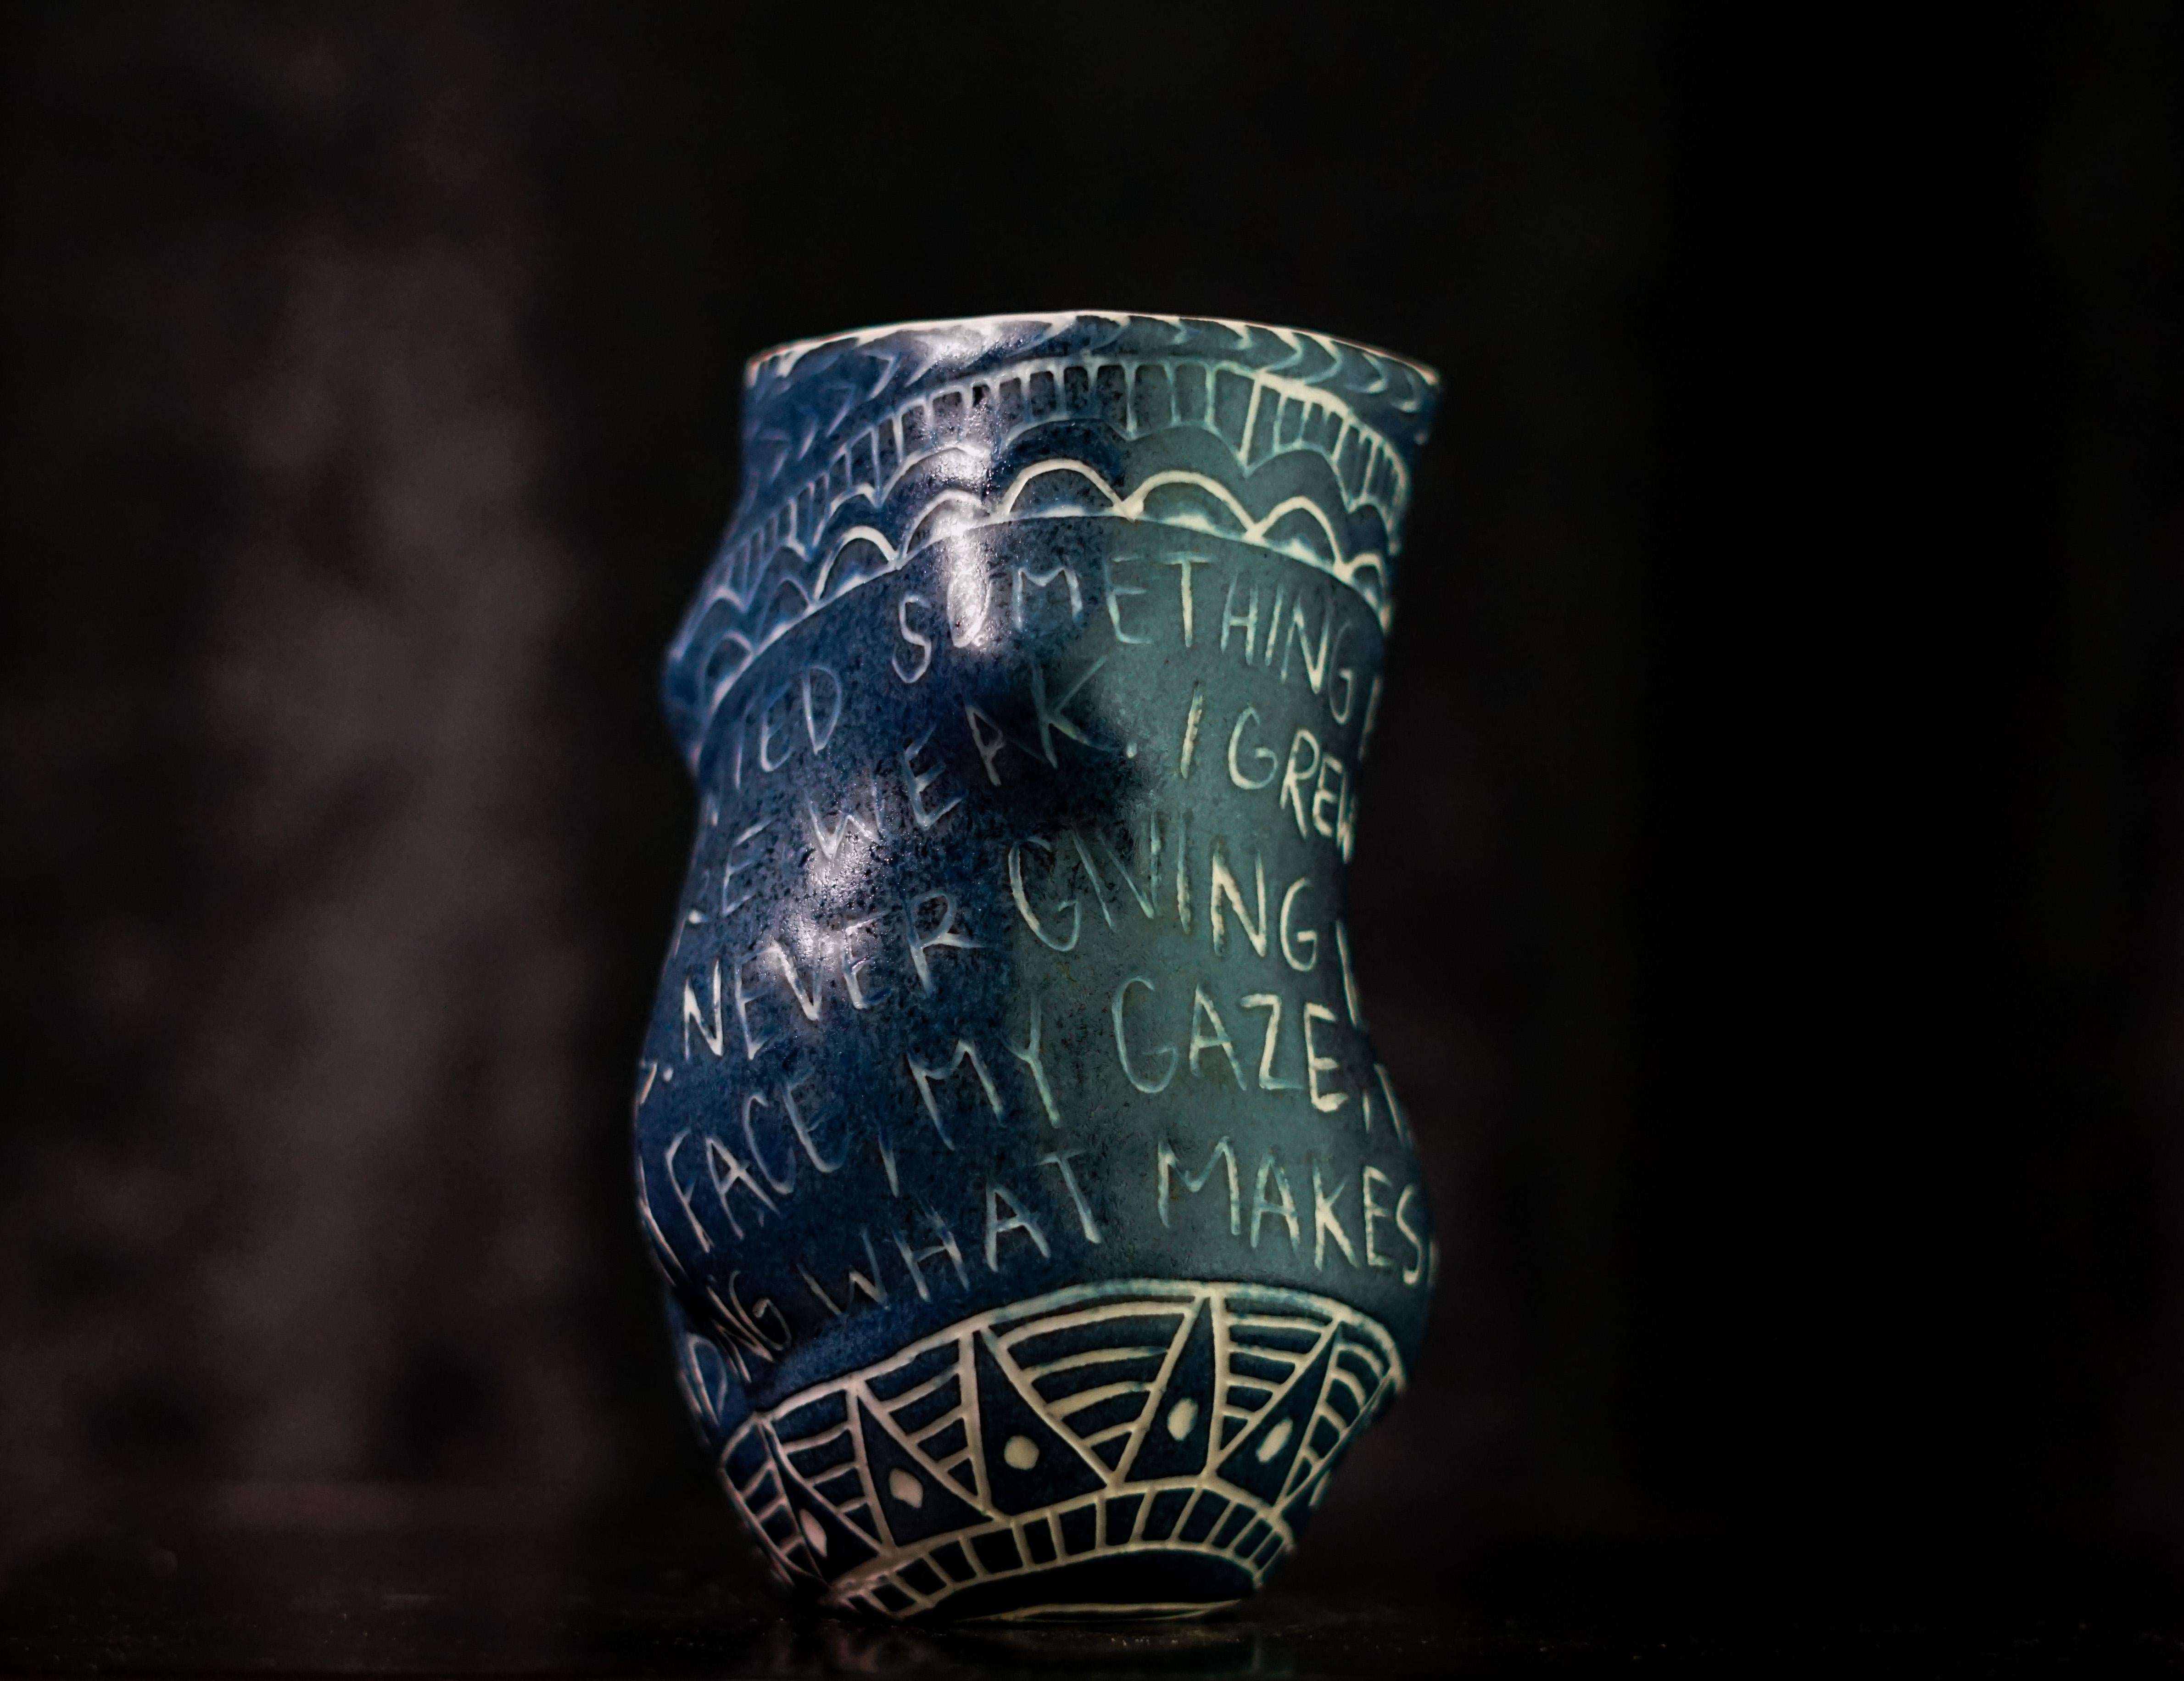 “You Wanted Something...”, 2019
From the series Fragments of Our Love Story
Porcelain cup with sgraffito detailing
5.5 x 3 x 3 inches.

“You wanted something..” You wanted something perfect. Delicately pure. Weak. I grew against your darkness. Never